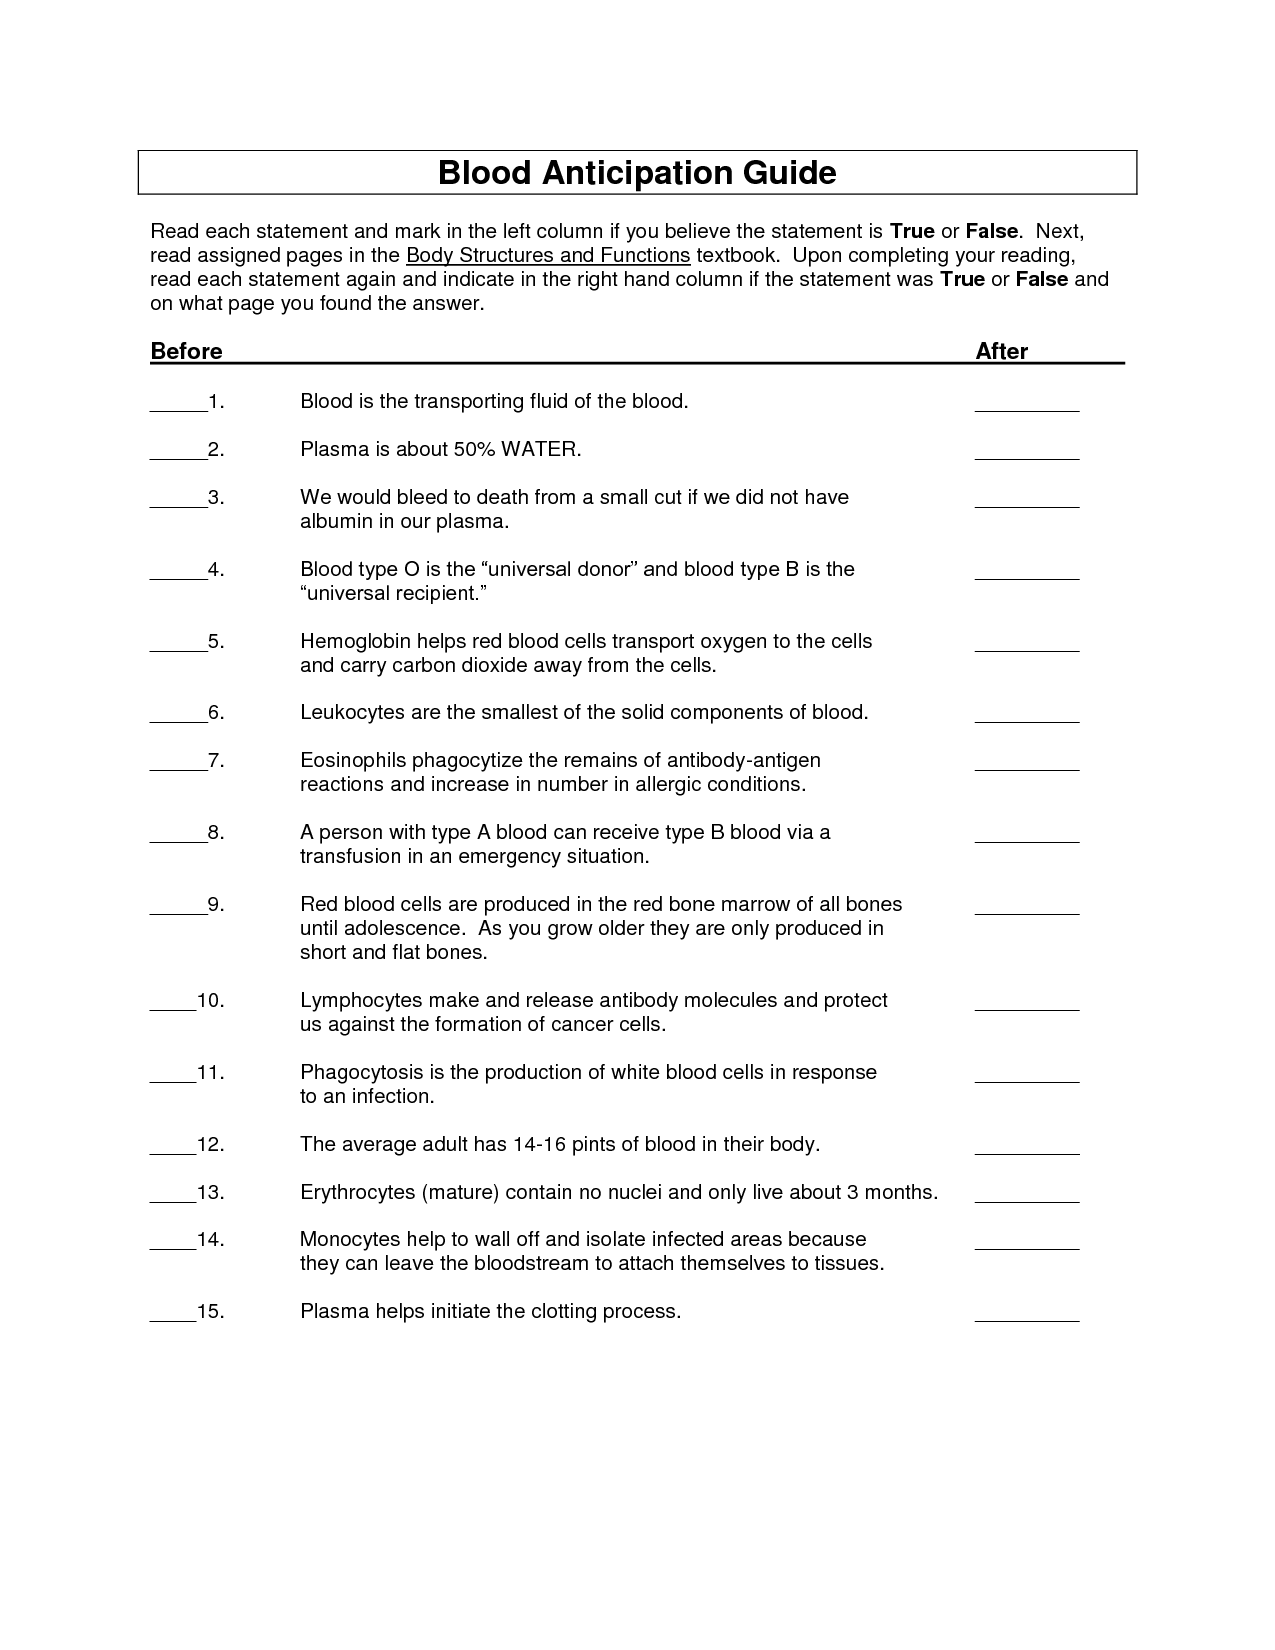 anatomy coloring book chapter 13 answers biology section 11 4 meiosis worksheet answer key anatomy chapter answers 13 coloring book 